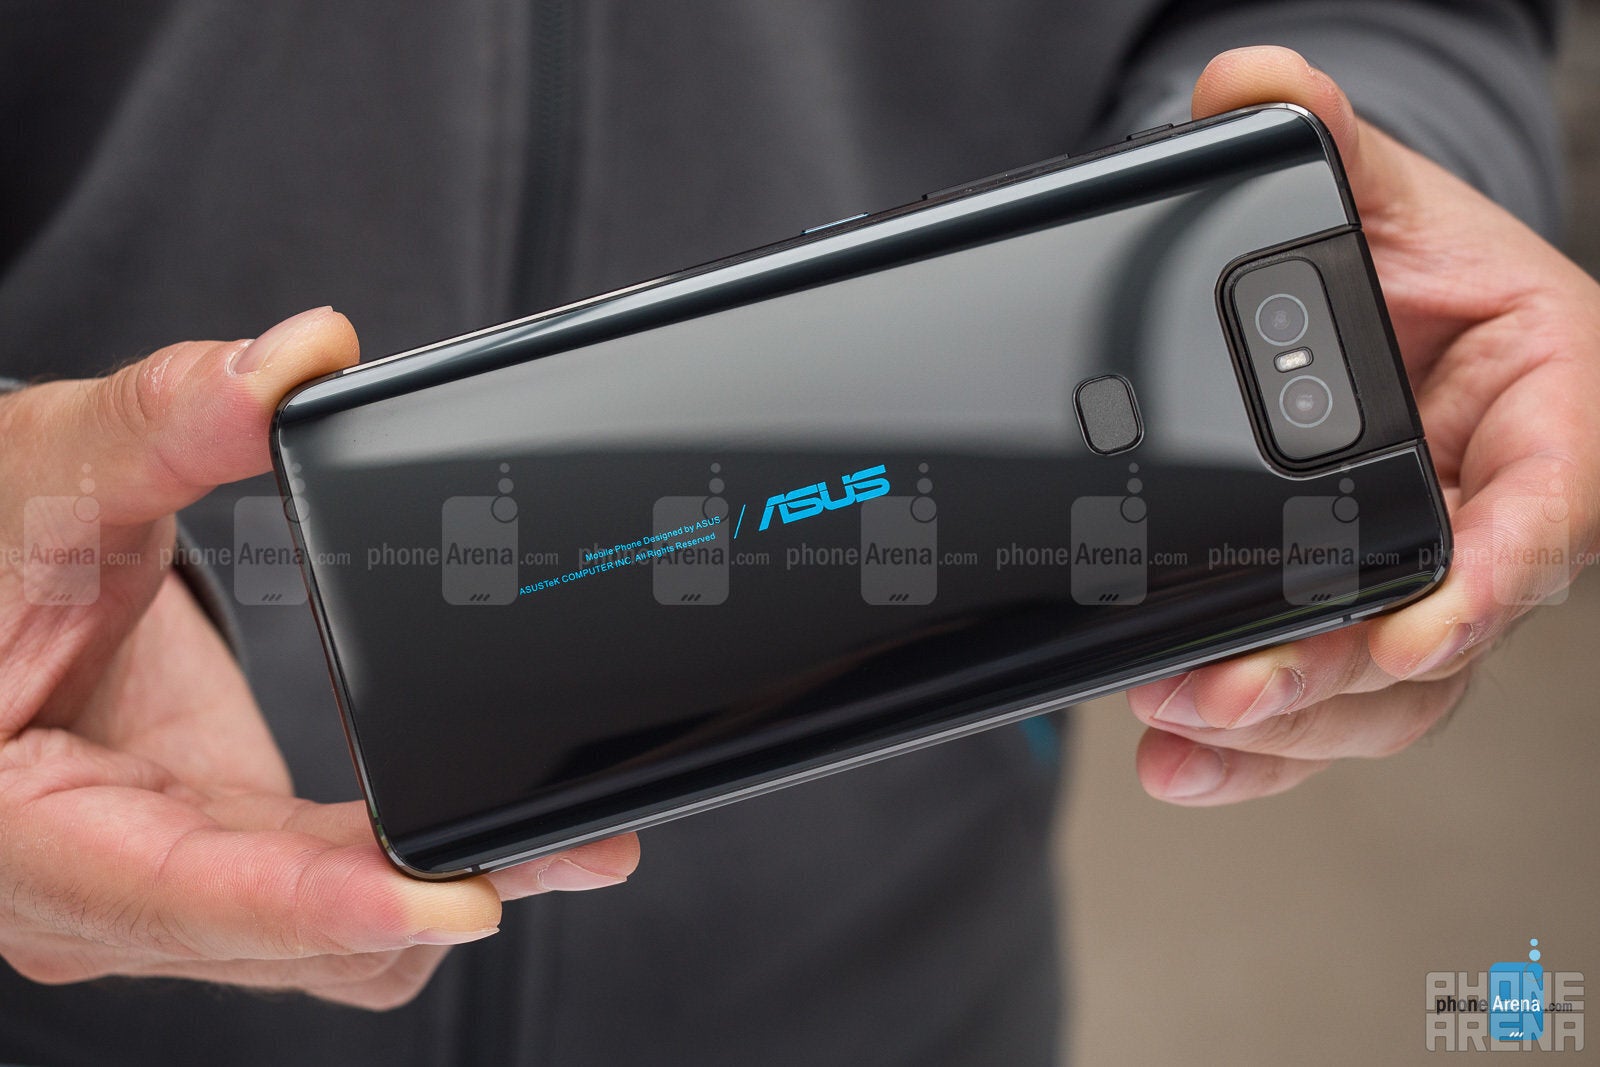 The ZenFone 6 is one of the best affordable flagships money can buy right now - Asus is low-key becoming a force to be reckoned with